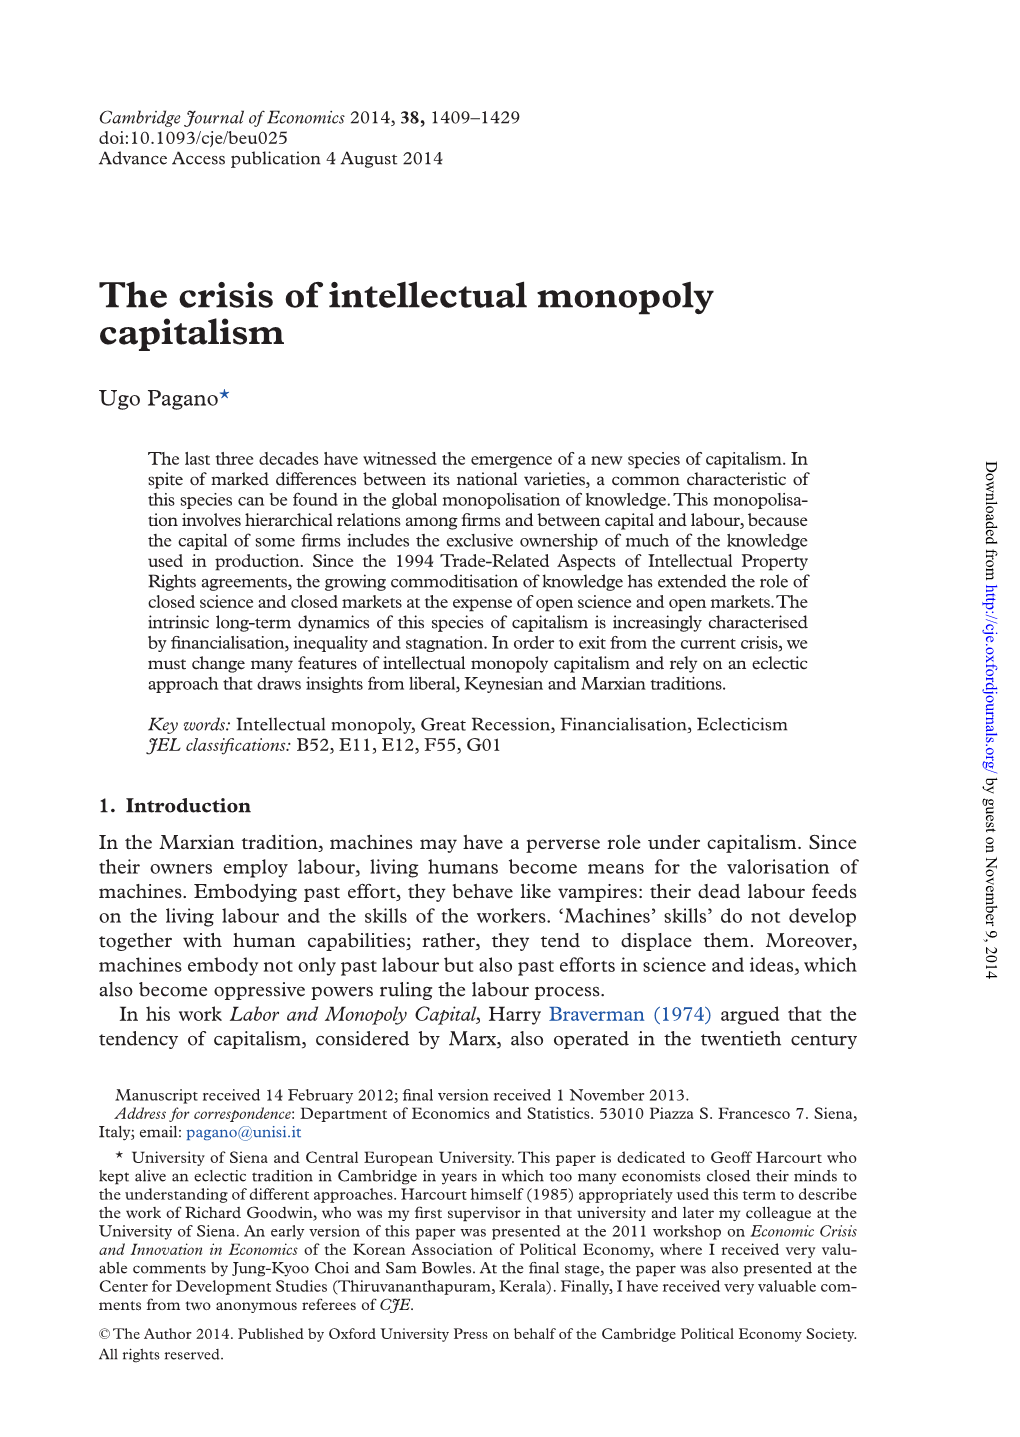 The Crisis of Intellectual Monopoly Capitalism